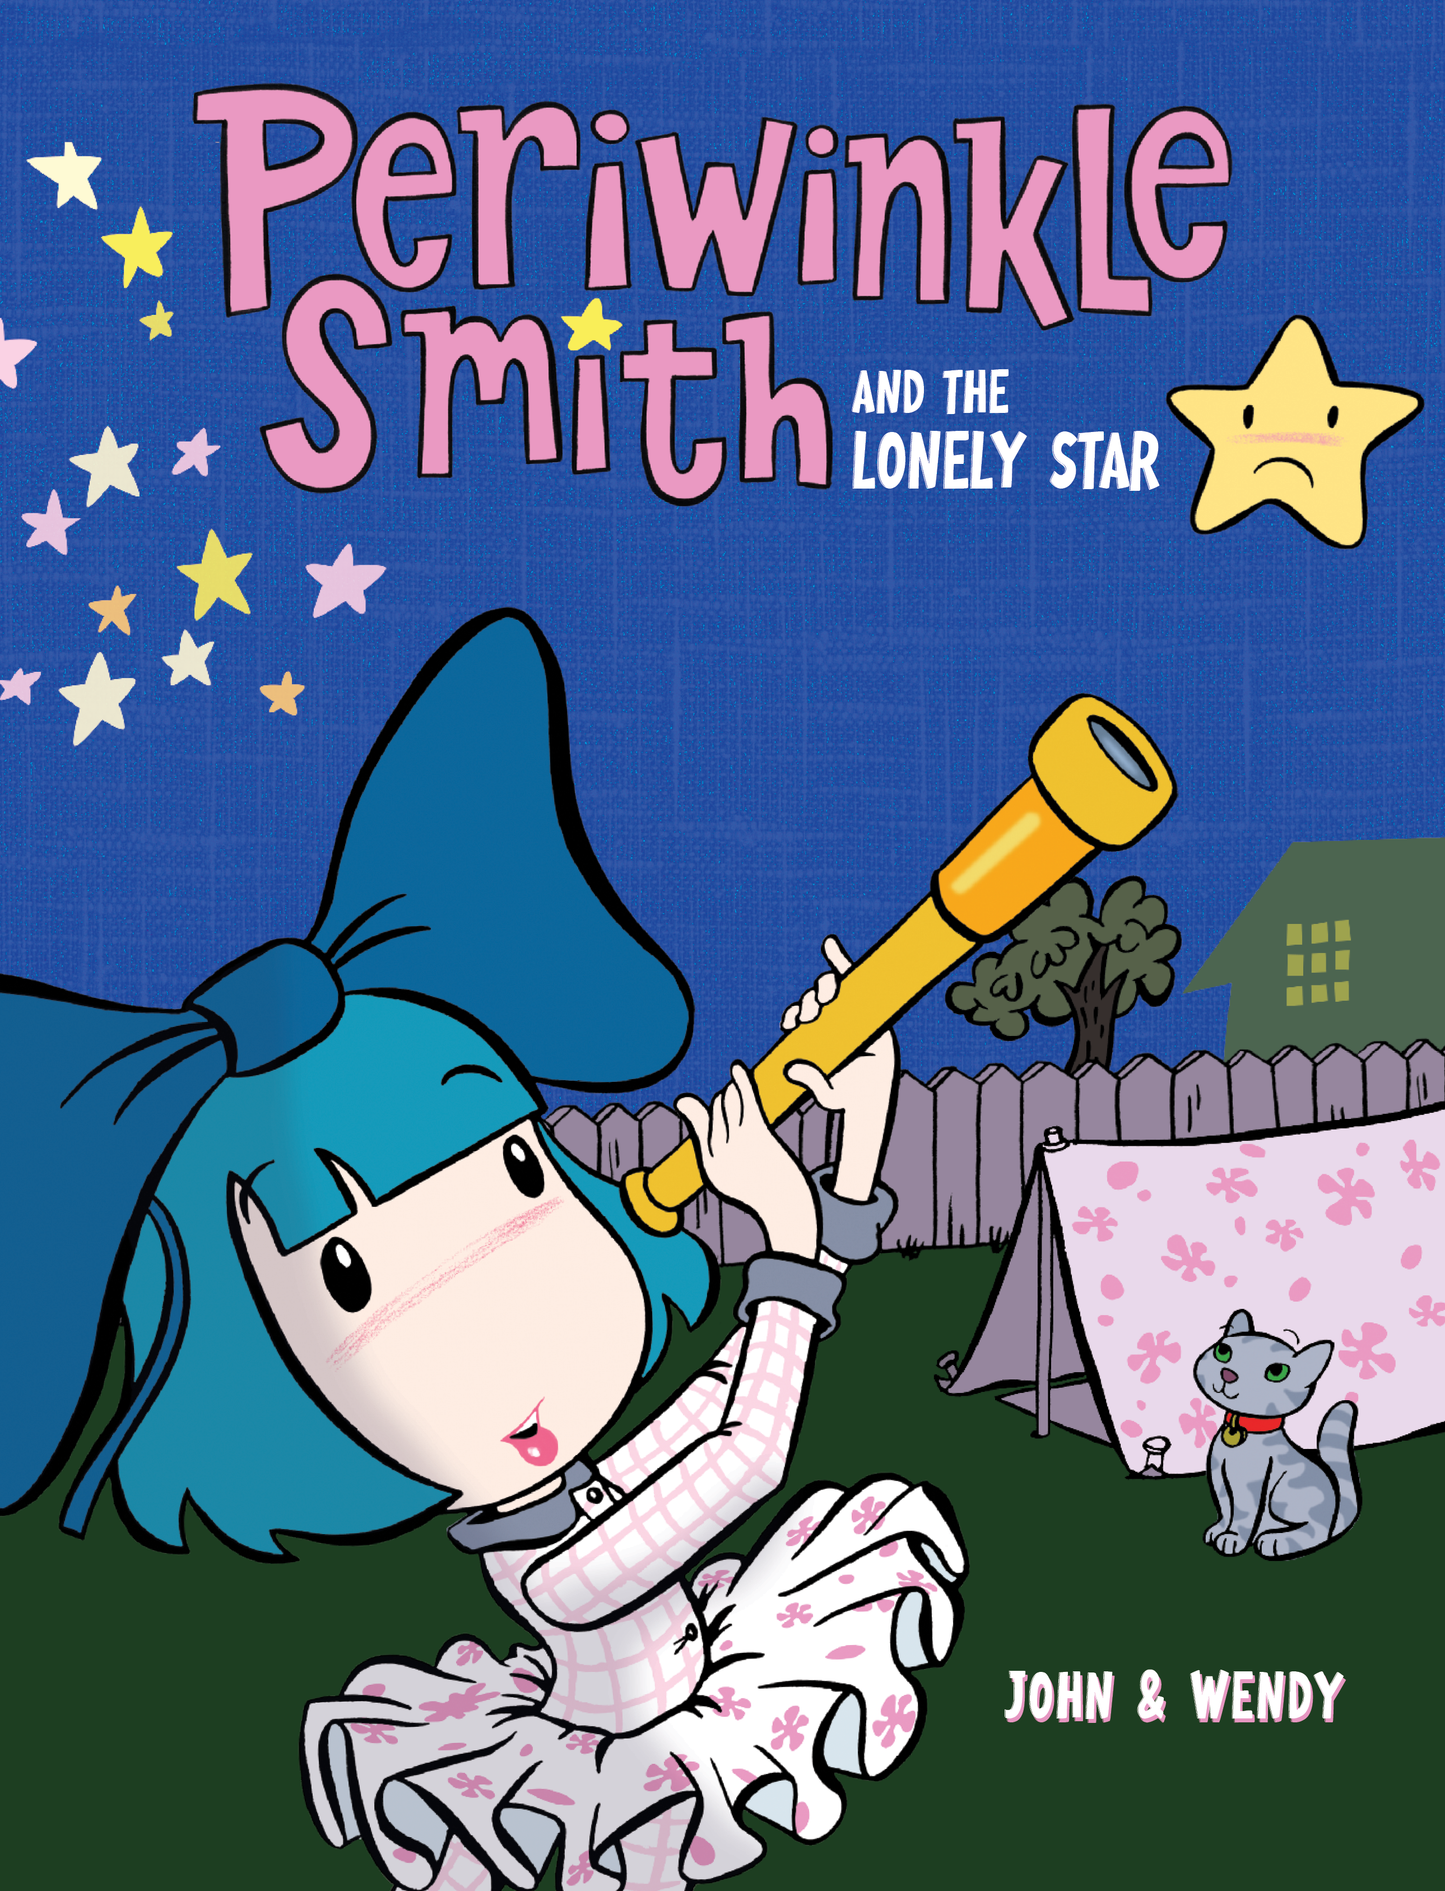 Periwinkle Smith and the Lonely Star